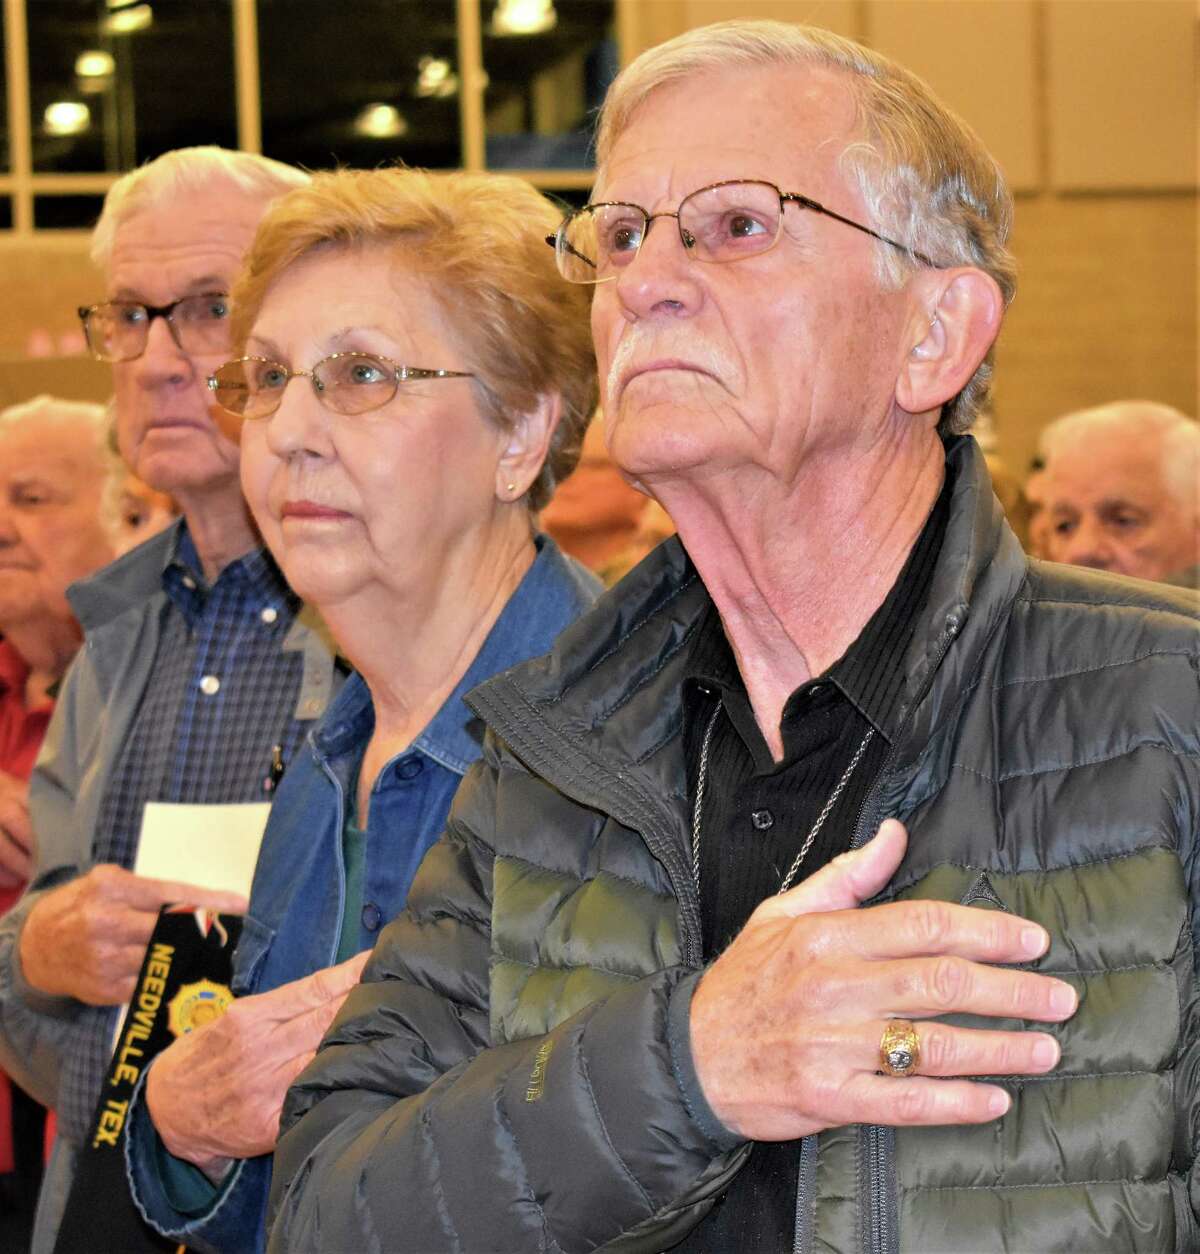 Saluting the American flag during "The National Anthem" at Needville High School's Veterans Day program on Friday are, from left, Army veteran Raymond Schmidt and his wife Evelyn, and Army veteran Julius Maresh.